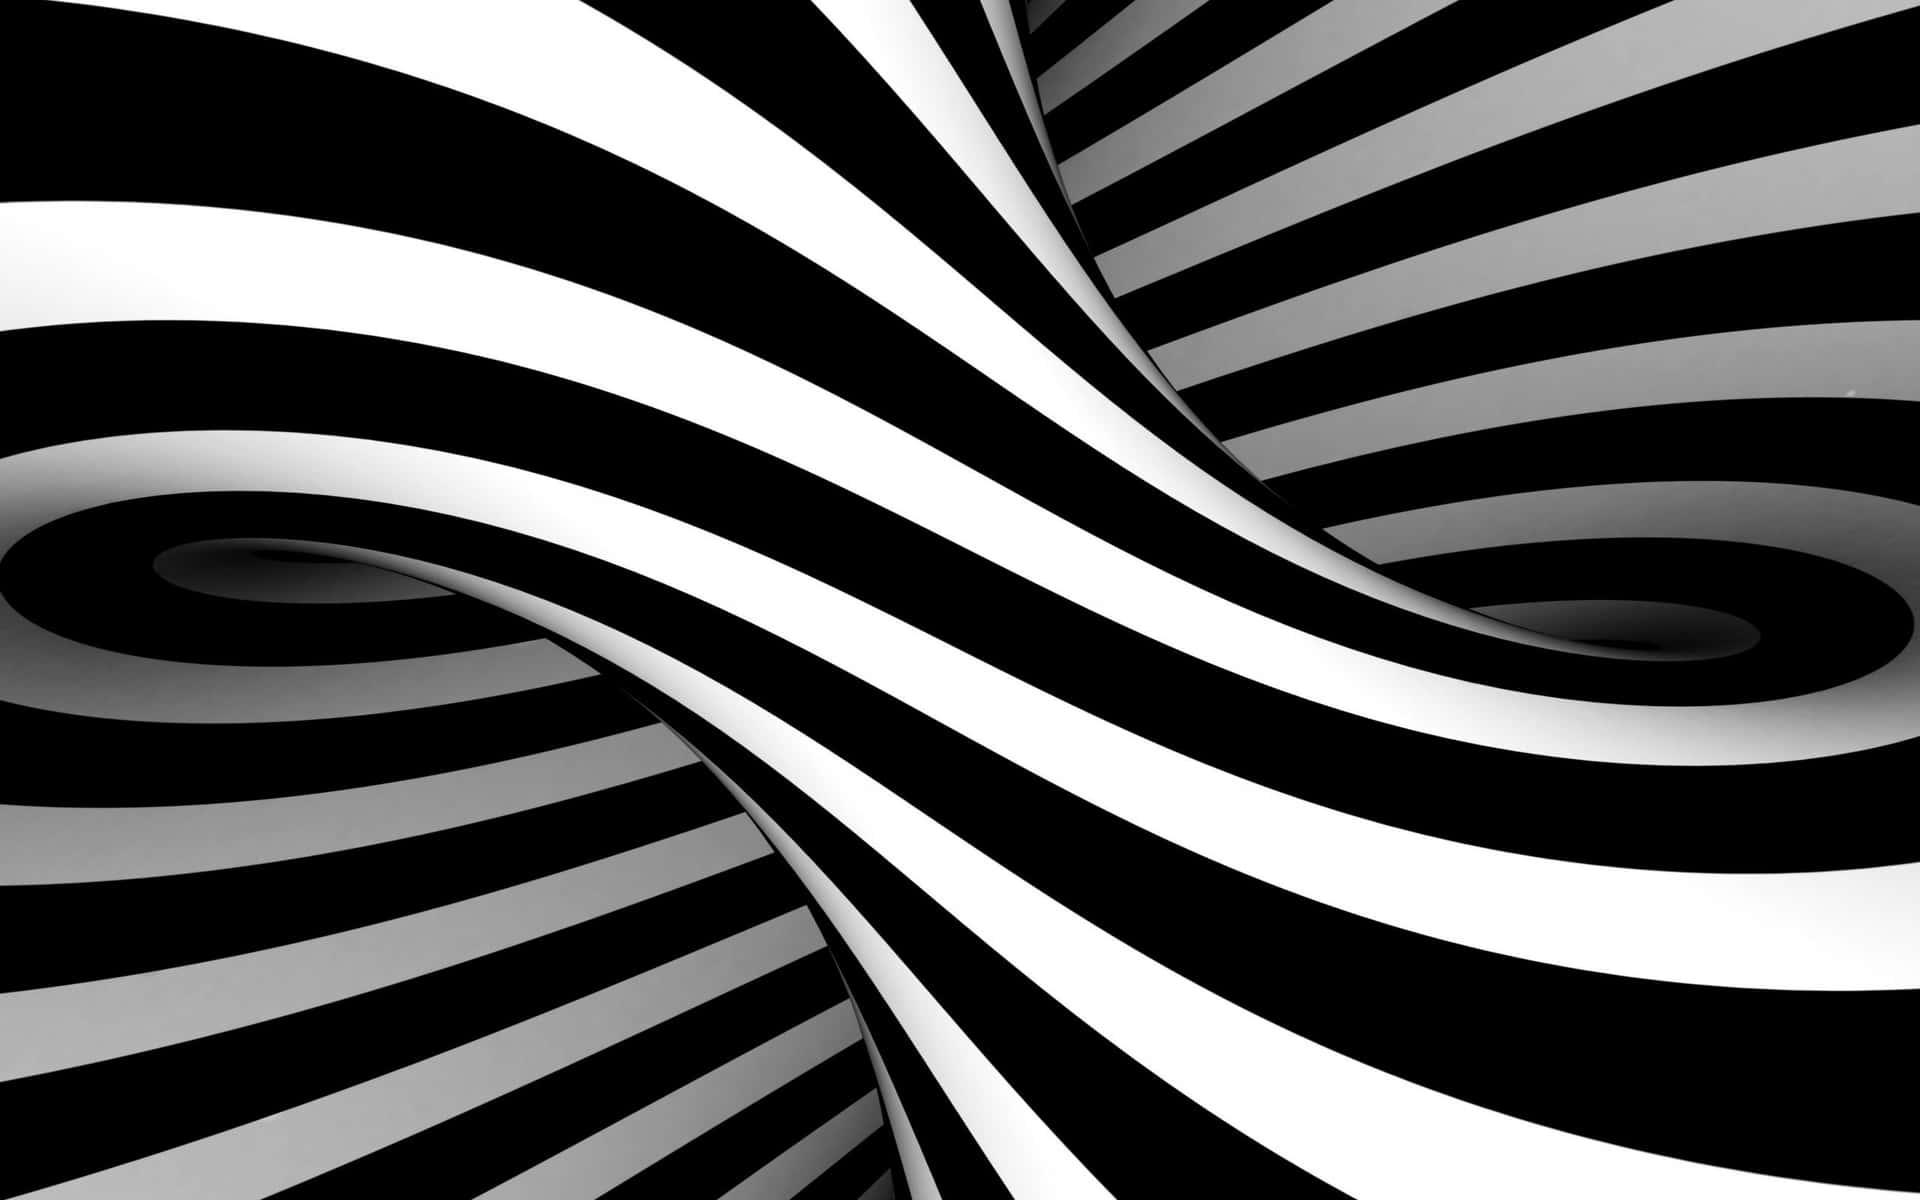 Black And White Stripes - Balance And Visual Interest Background